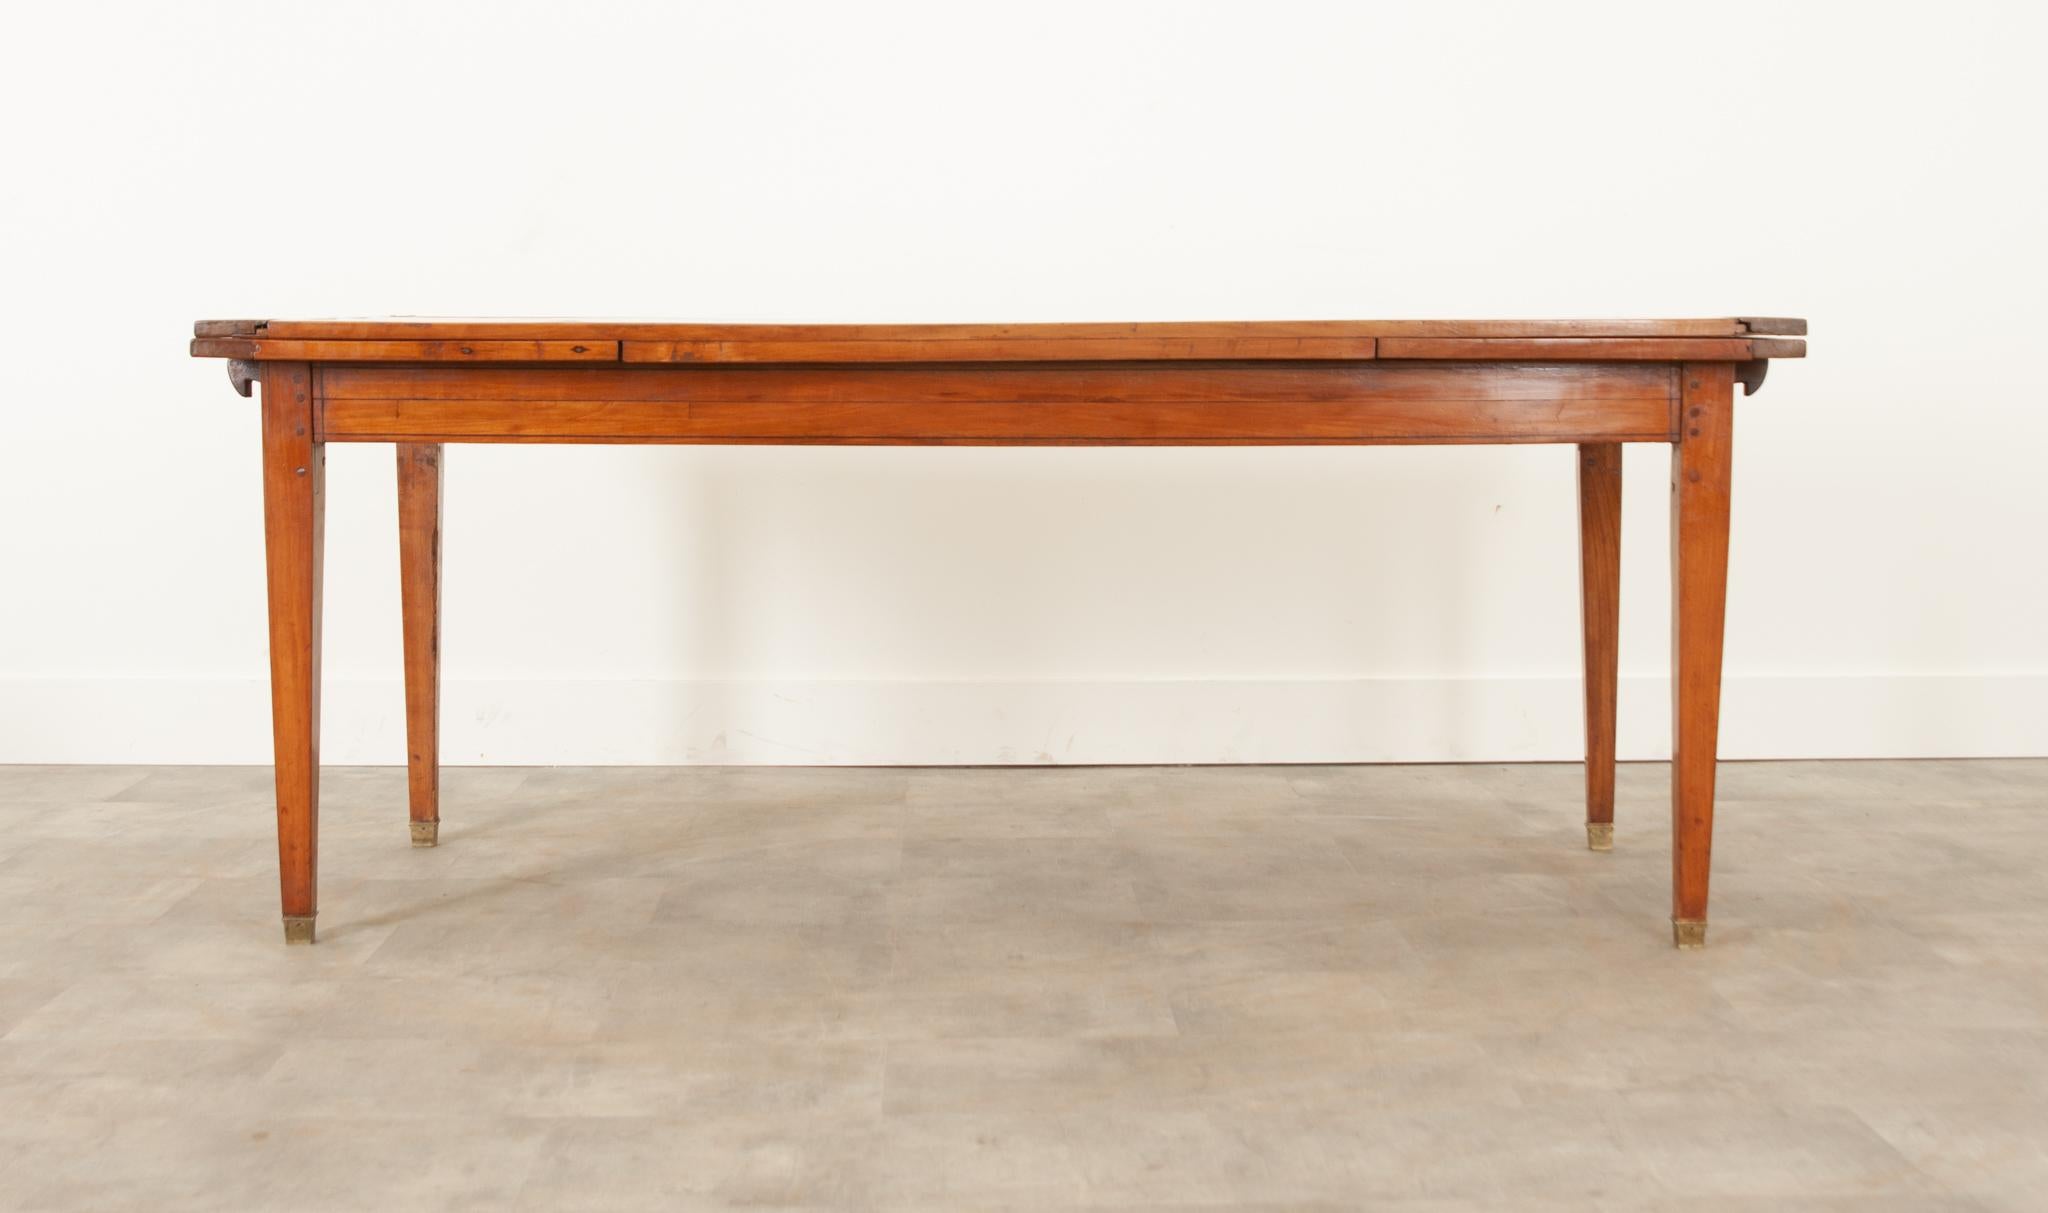 A gorgeous extended dining table from 19th century France. The vibrant fruitwood has gained a wonderful patina over the years and will effortlessly add so much character to your dining area. A narrow inlay of darker wood adds a nice touch of